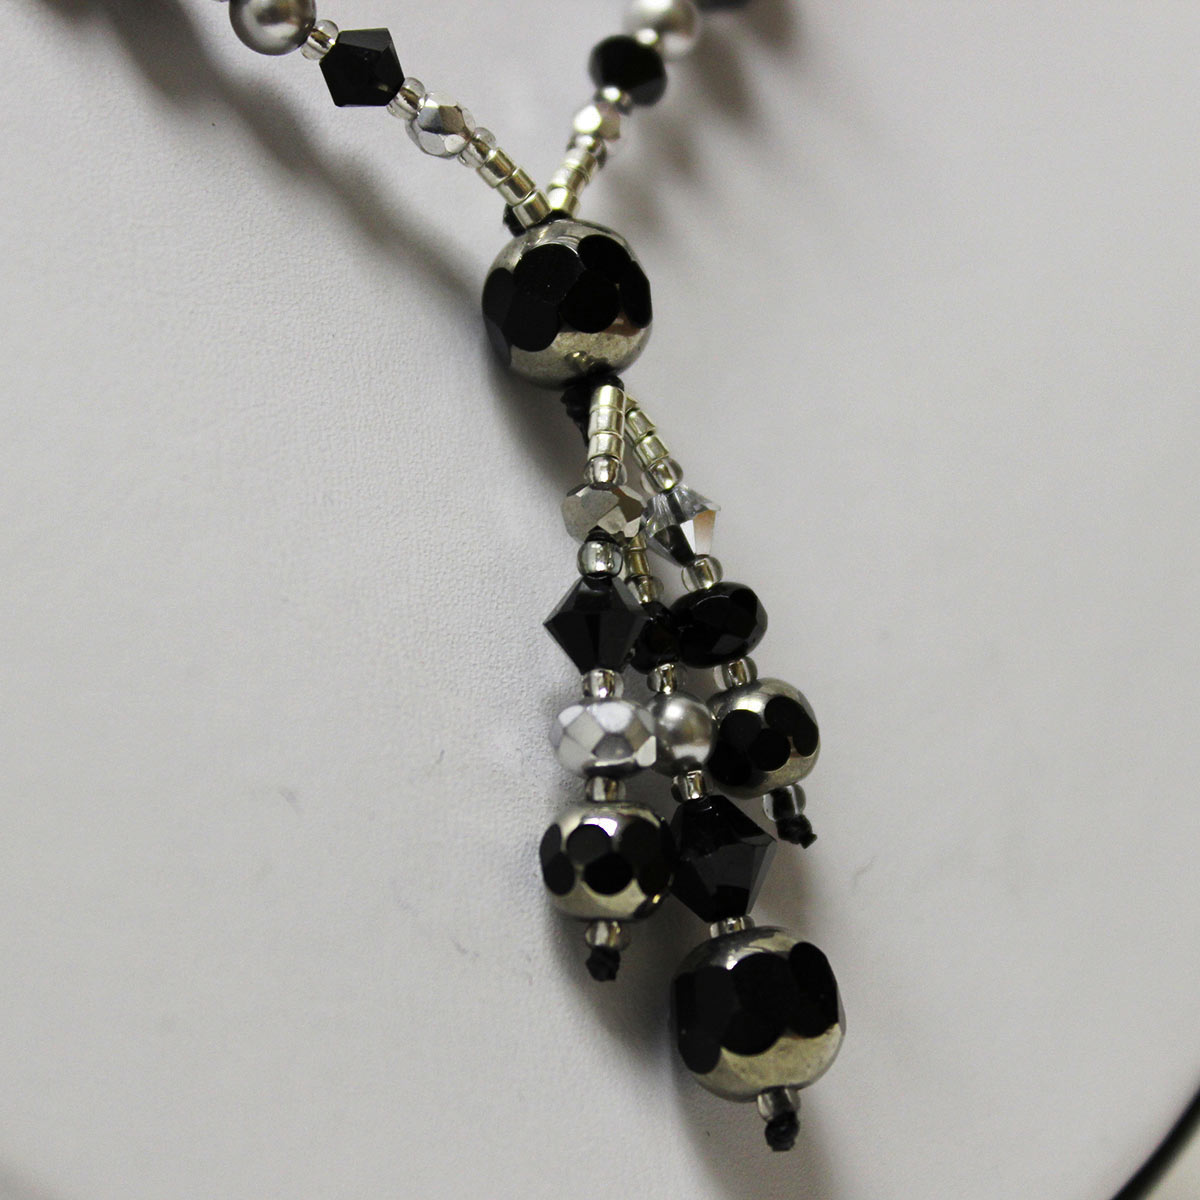 drop necklace, handmade pearl necklace, cathedral beads, crystal beads, black and silver necklace